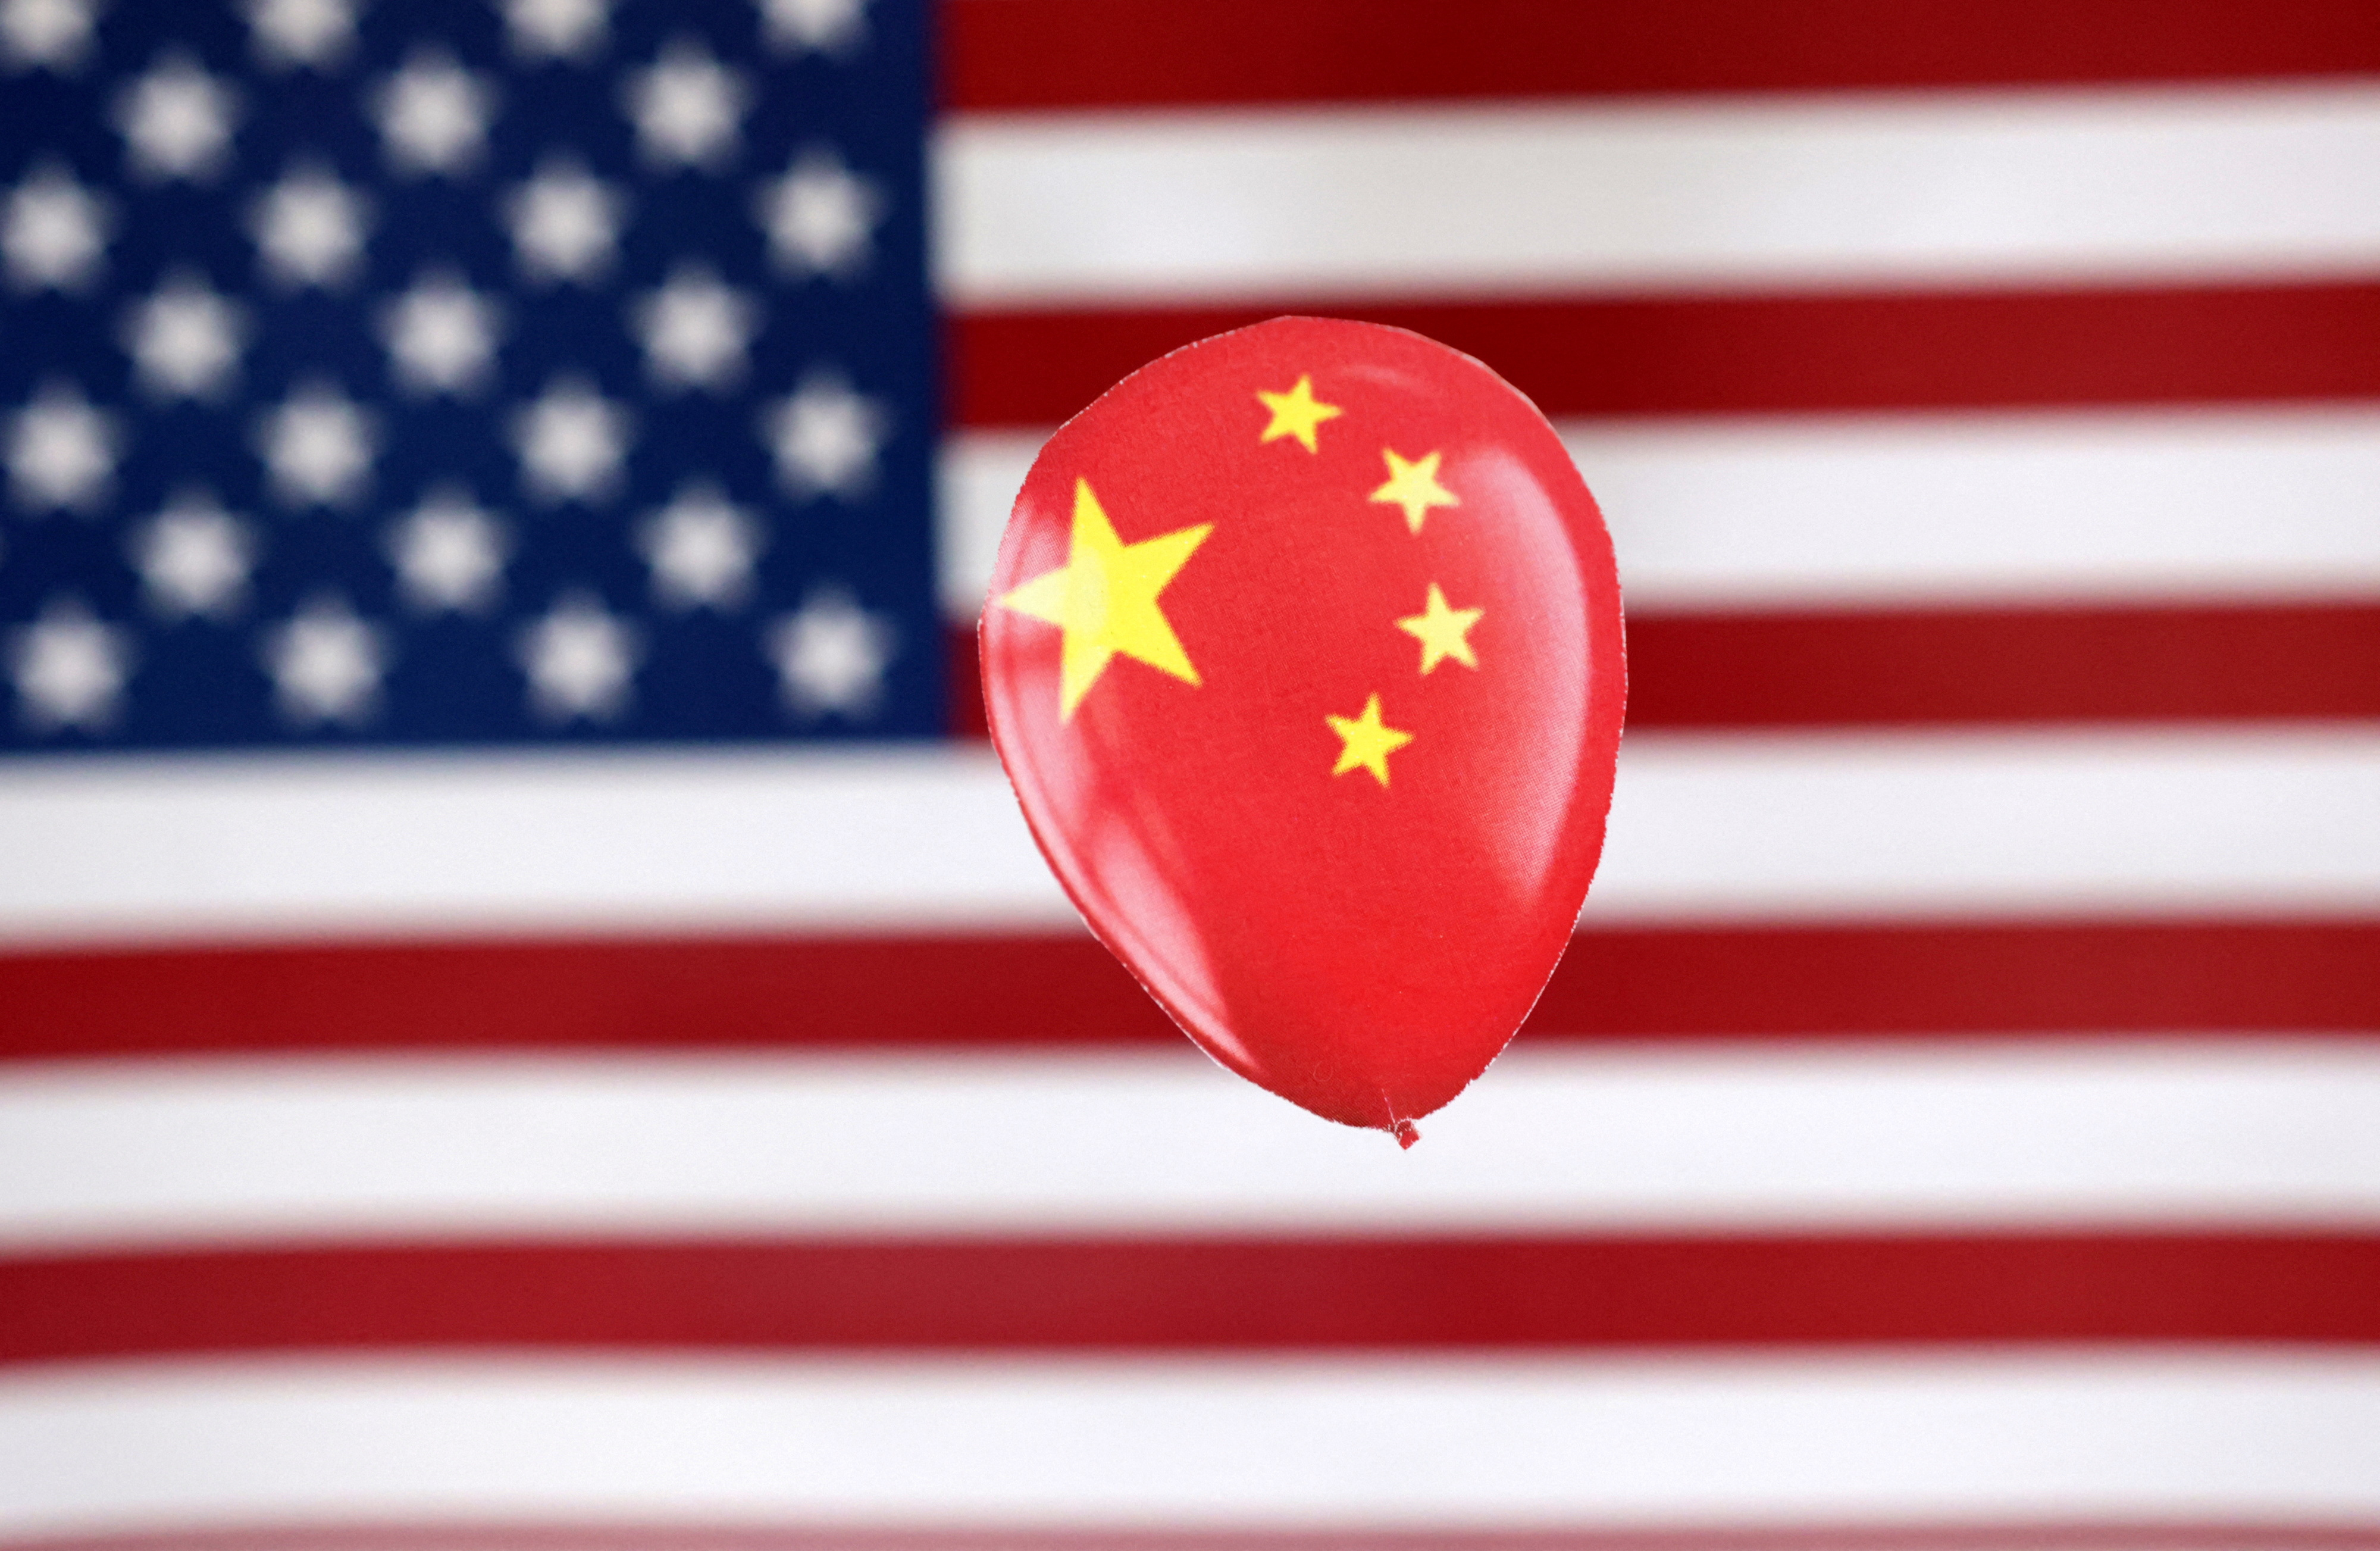 Chinese Spy Balloon Saga: U.S. Officials Uncover Use of American Internet Service Provider